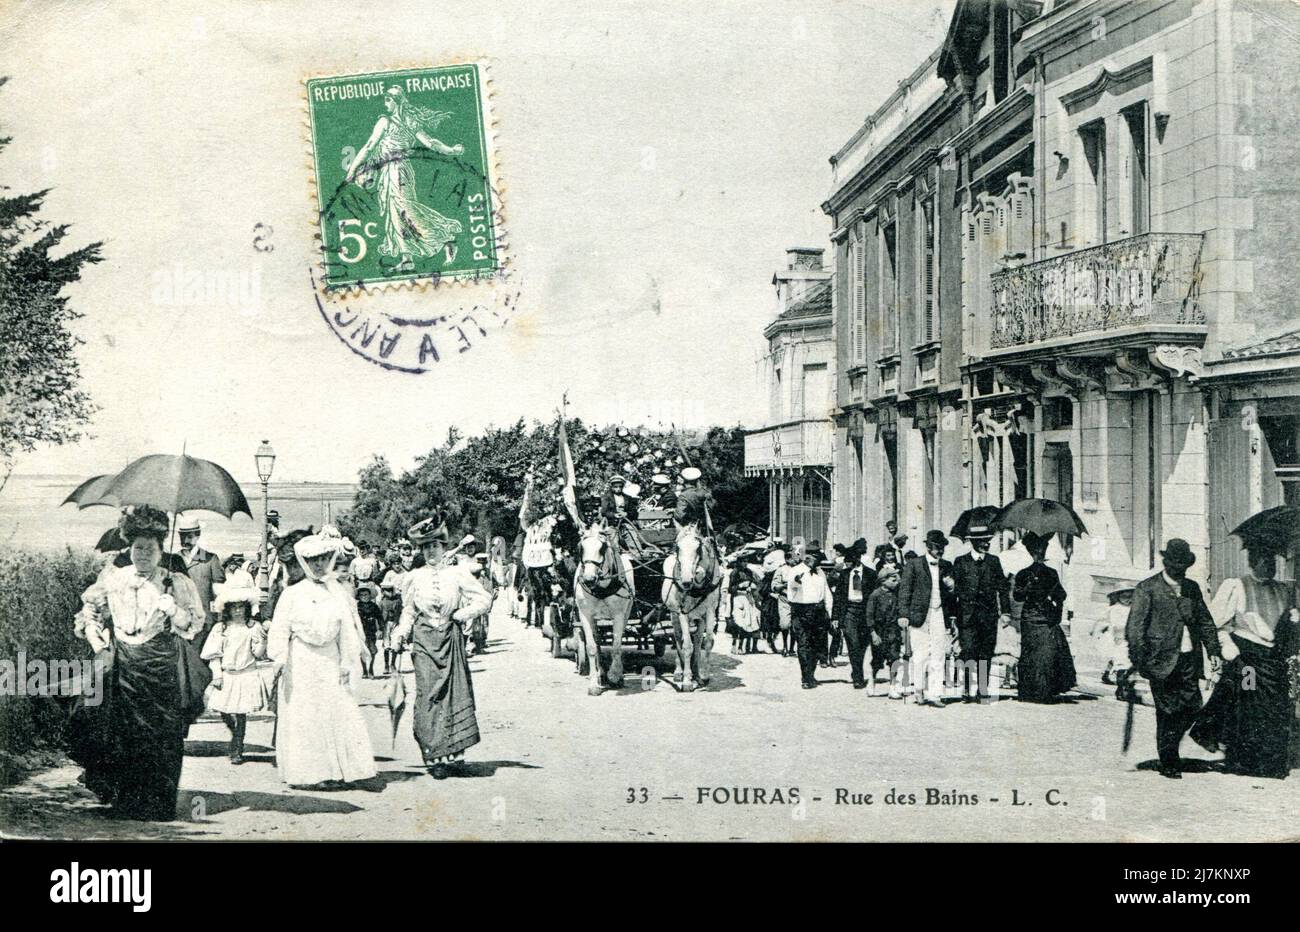 Fouras, rue des Bains Department: 17 - Charente-Maritime Region: Nouvelle-Aquitaine (formerly Poitou-Charentes) Vintage postcard, late 19th - early 20th century Stock Photo